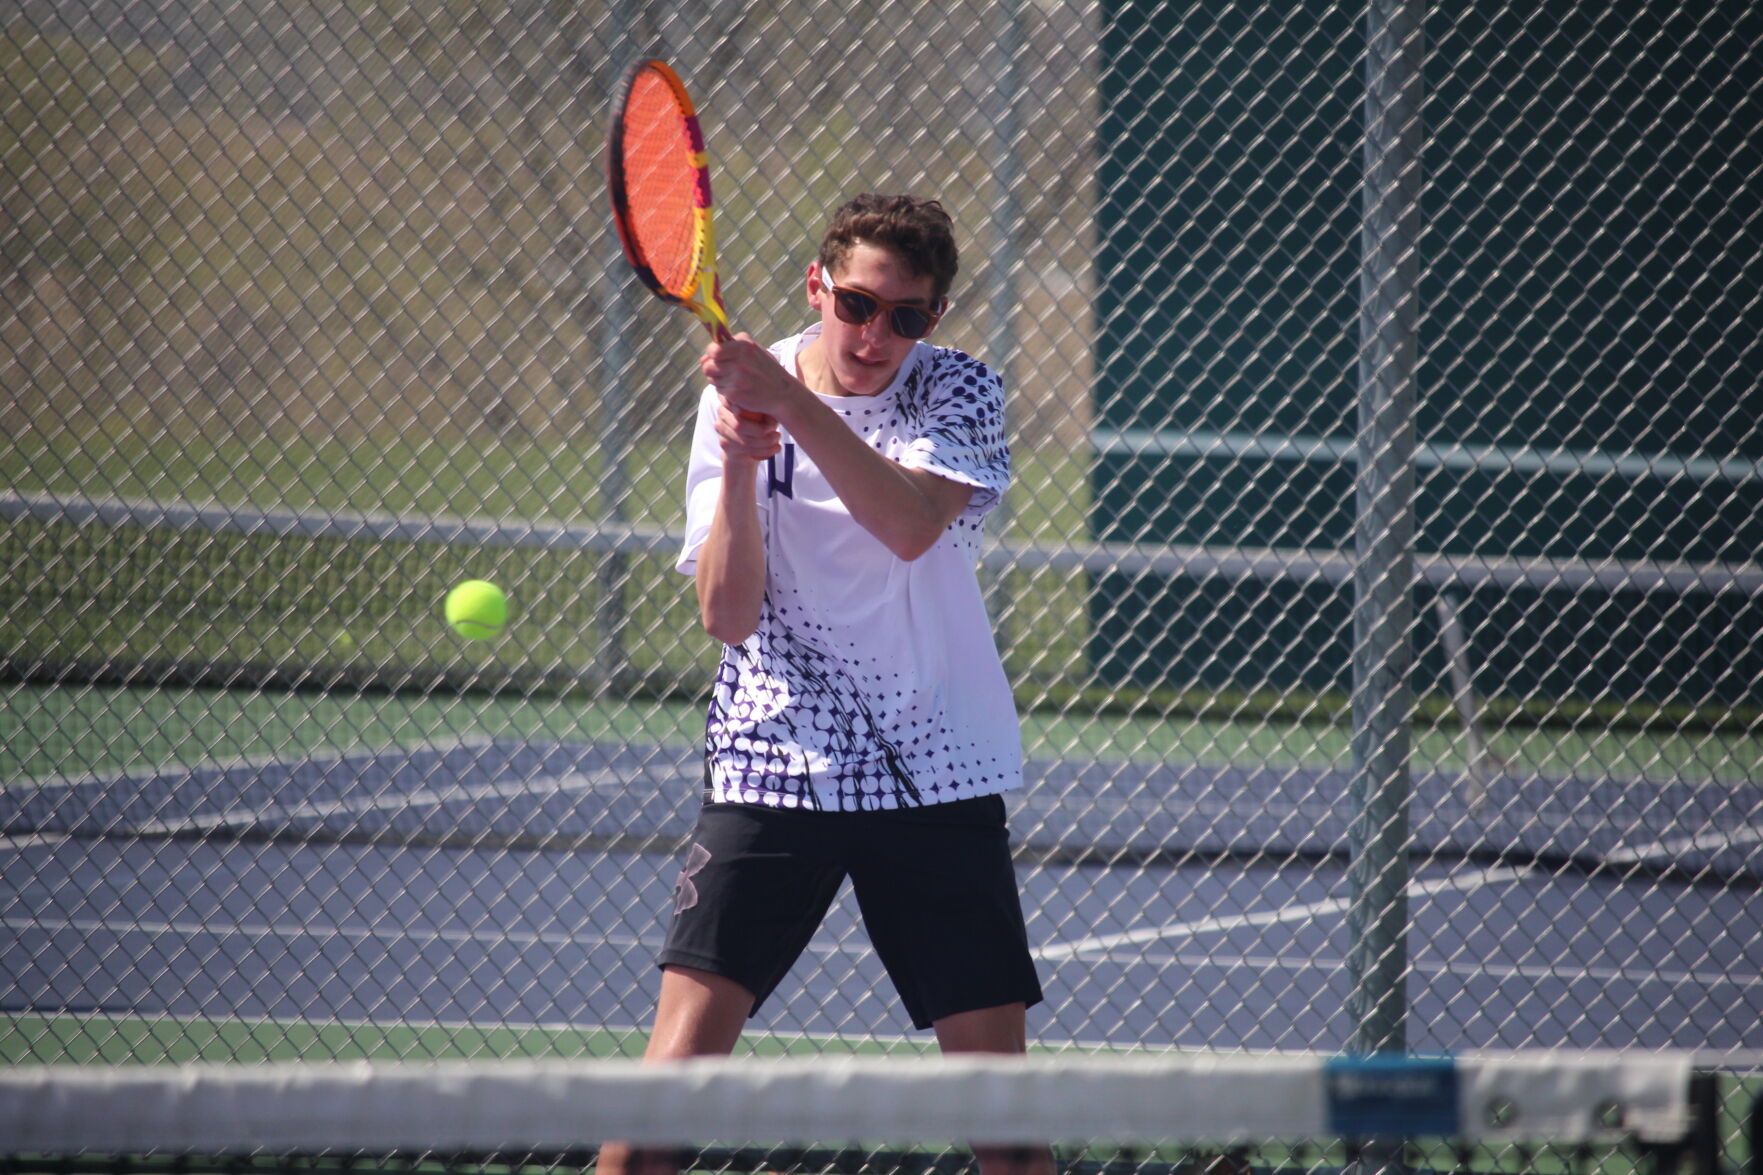 Boys tennis: Loaded Warriors look to contend for Badger Large title